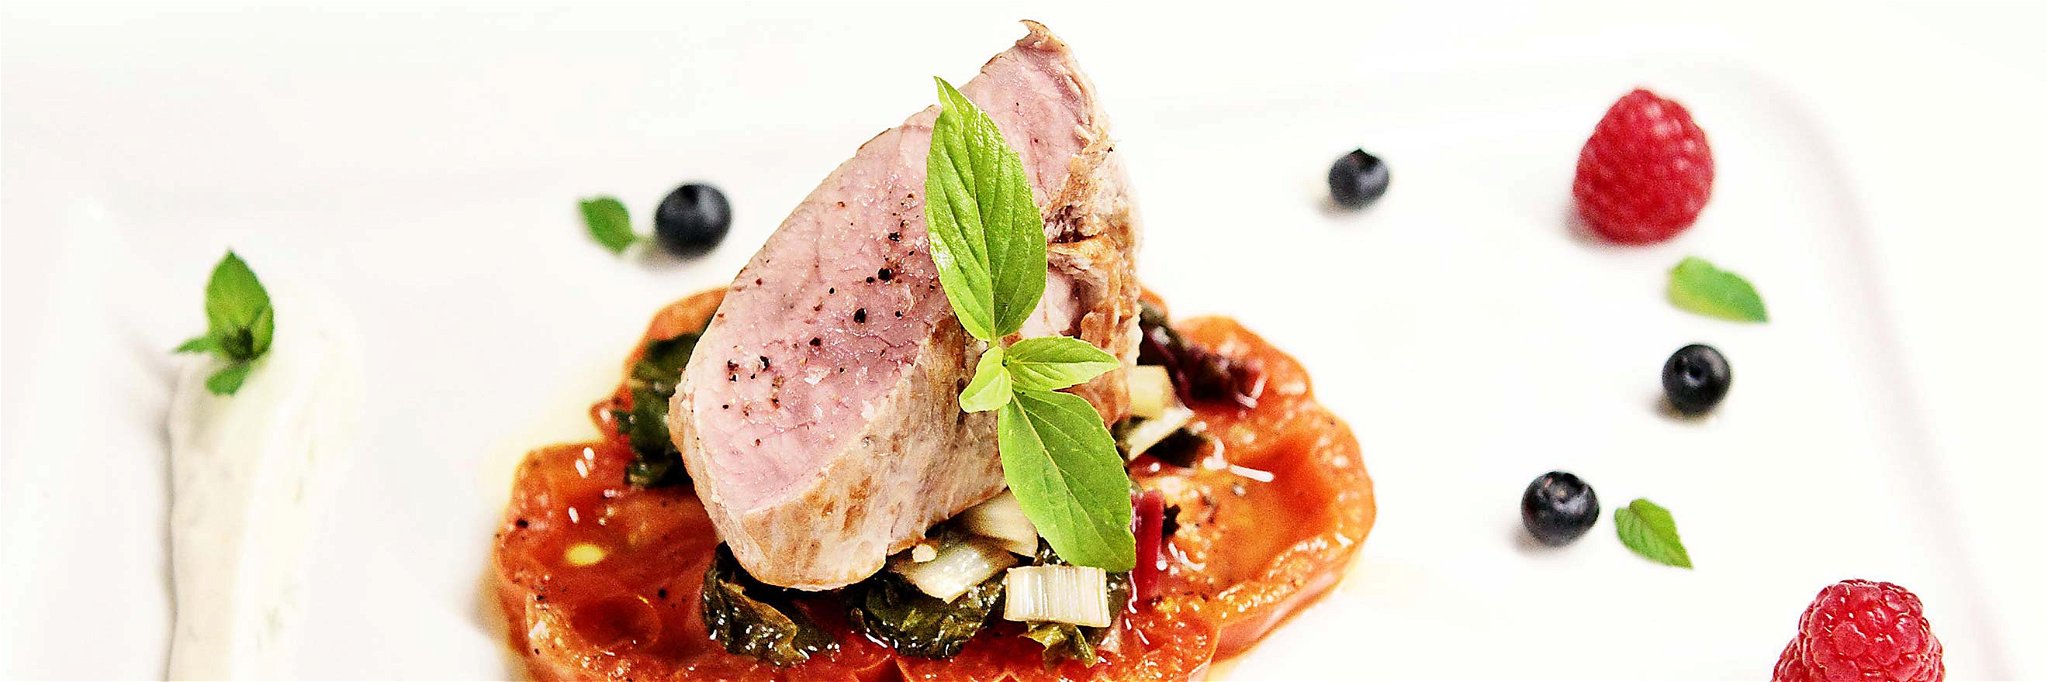 Pork Fillet with Chard and Tomato